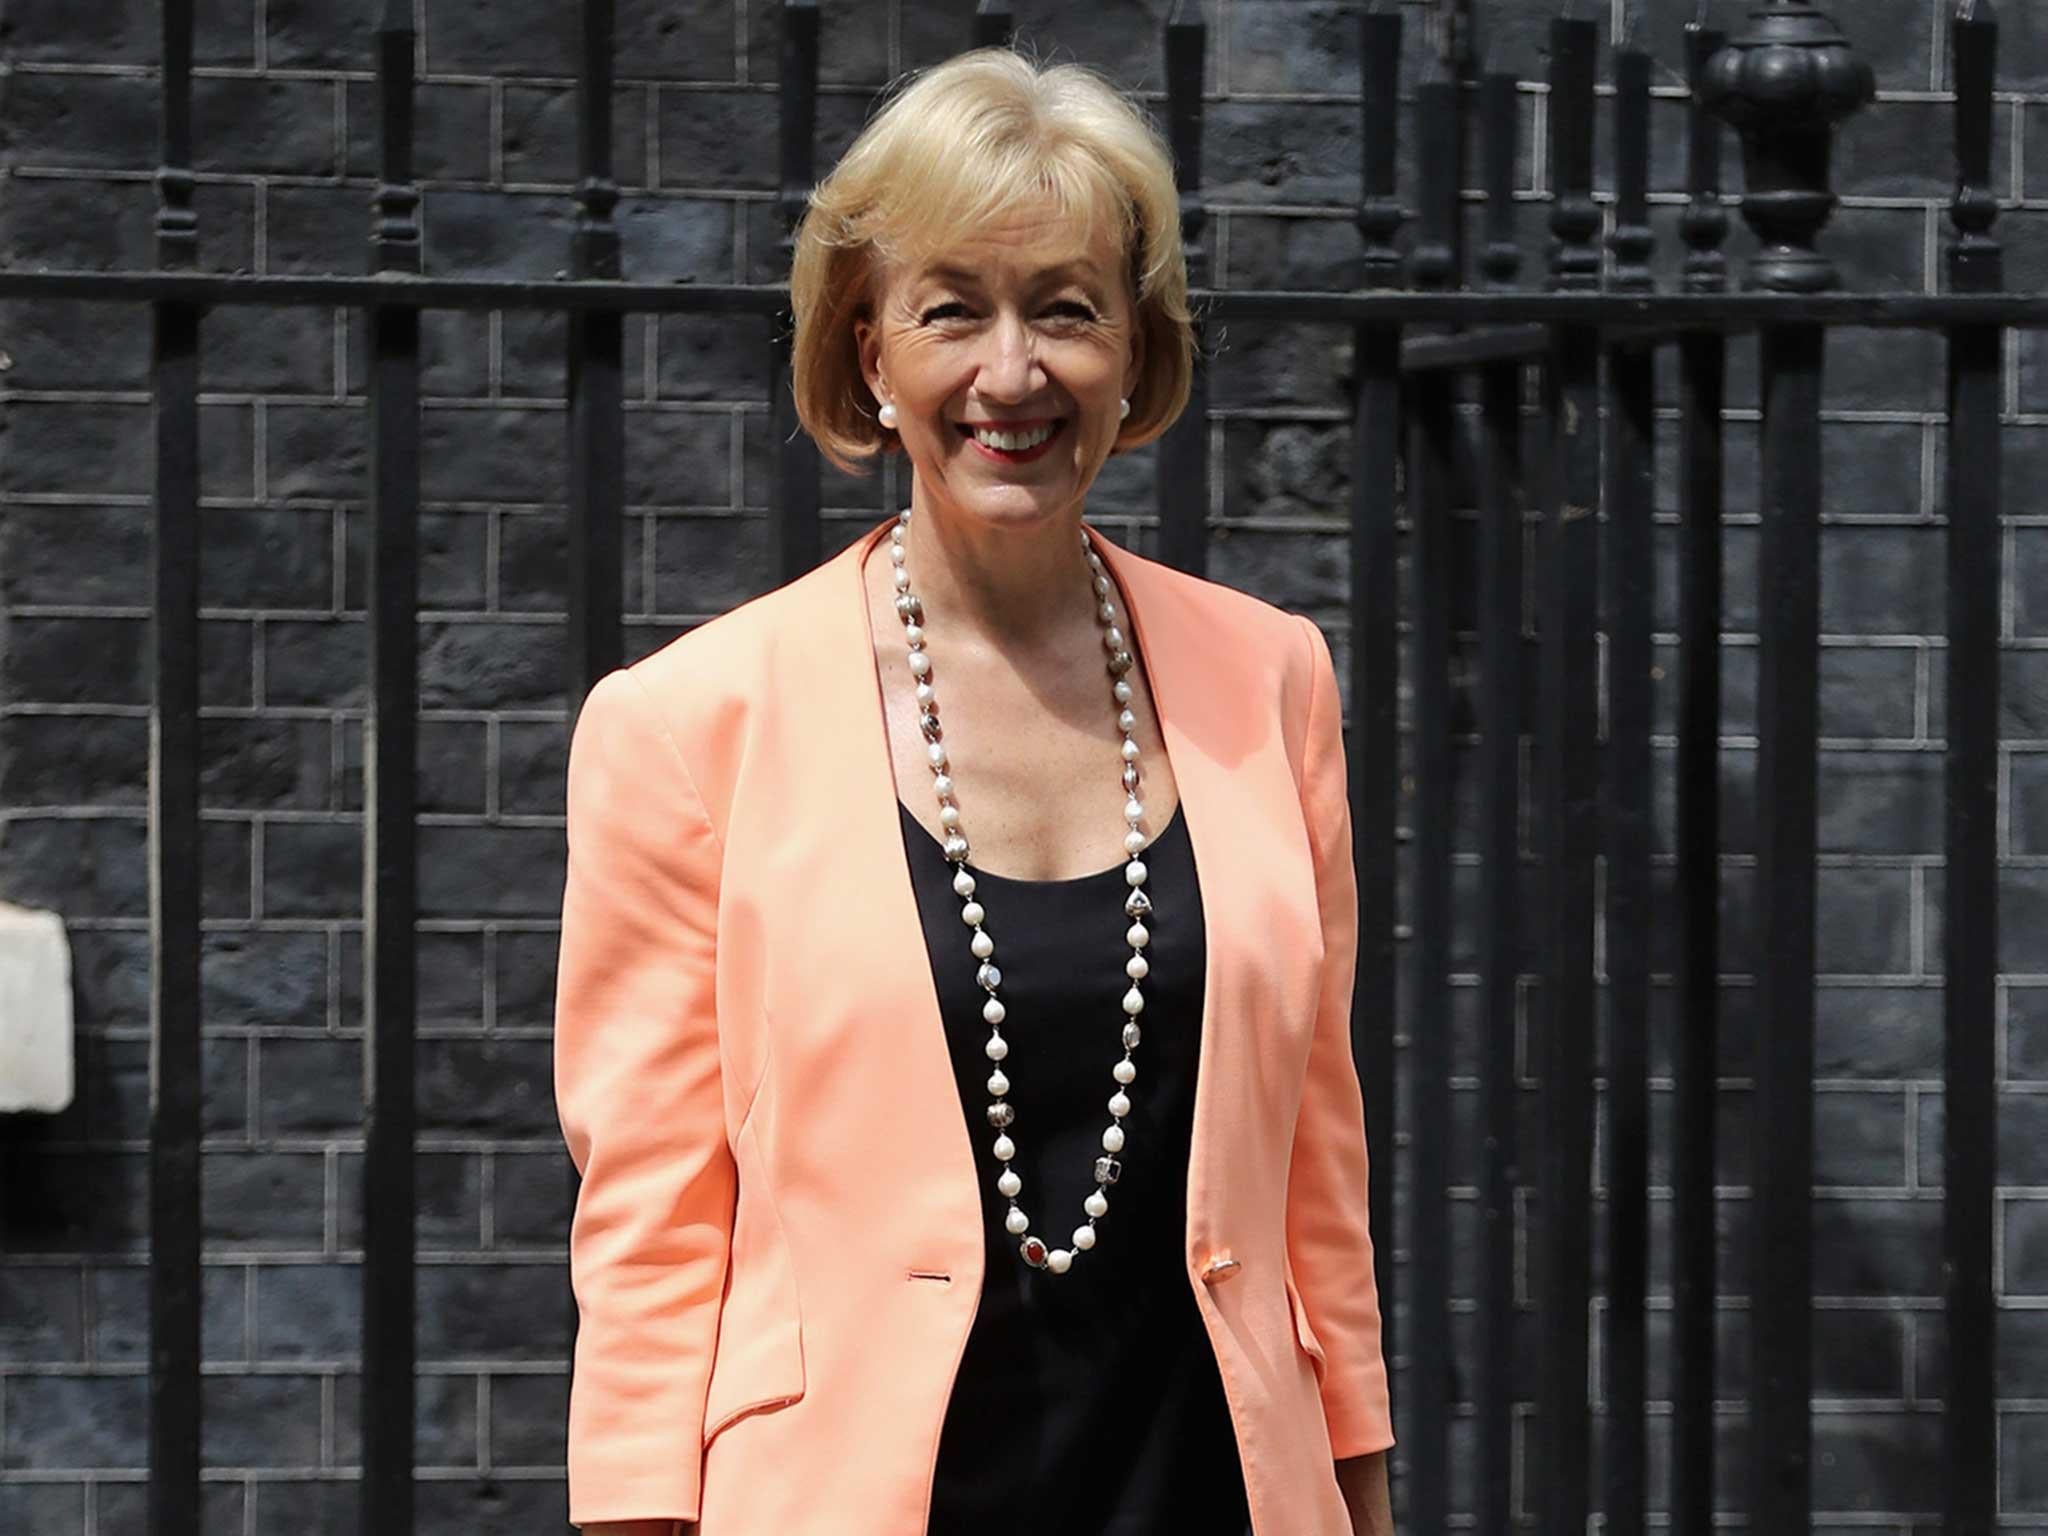 Andrea Leadsom MP is the Secretary of State for Environment, Food and Rural Affairs